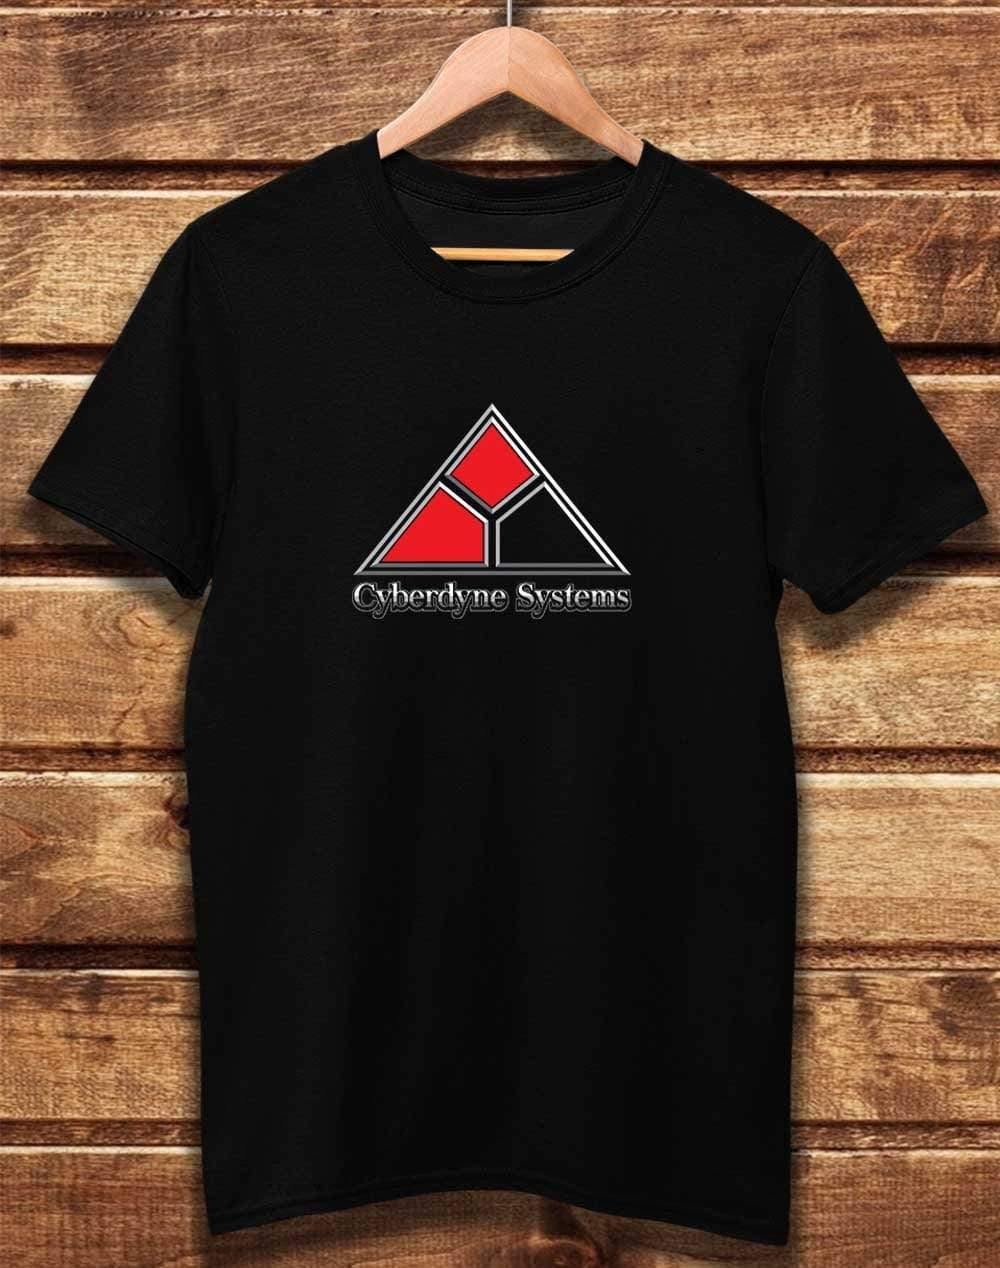 DELUXE Cyberdyne Systems Organic Cotton T-Shirt XS / Black  - Off World Tees